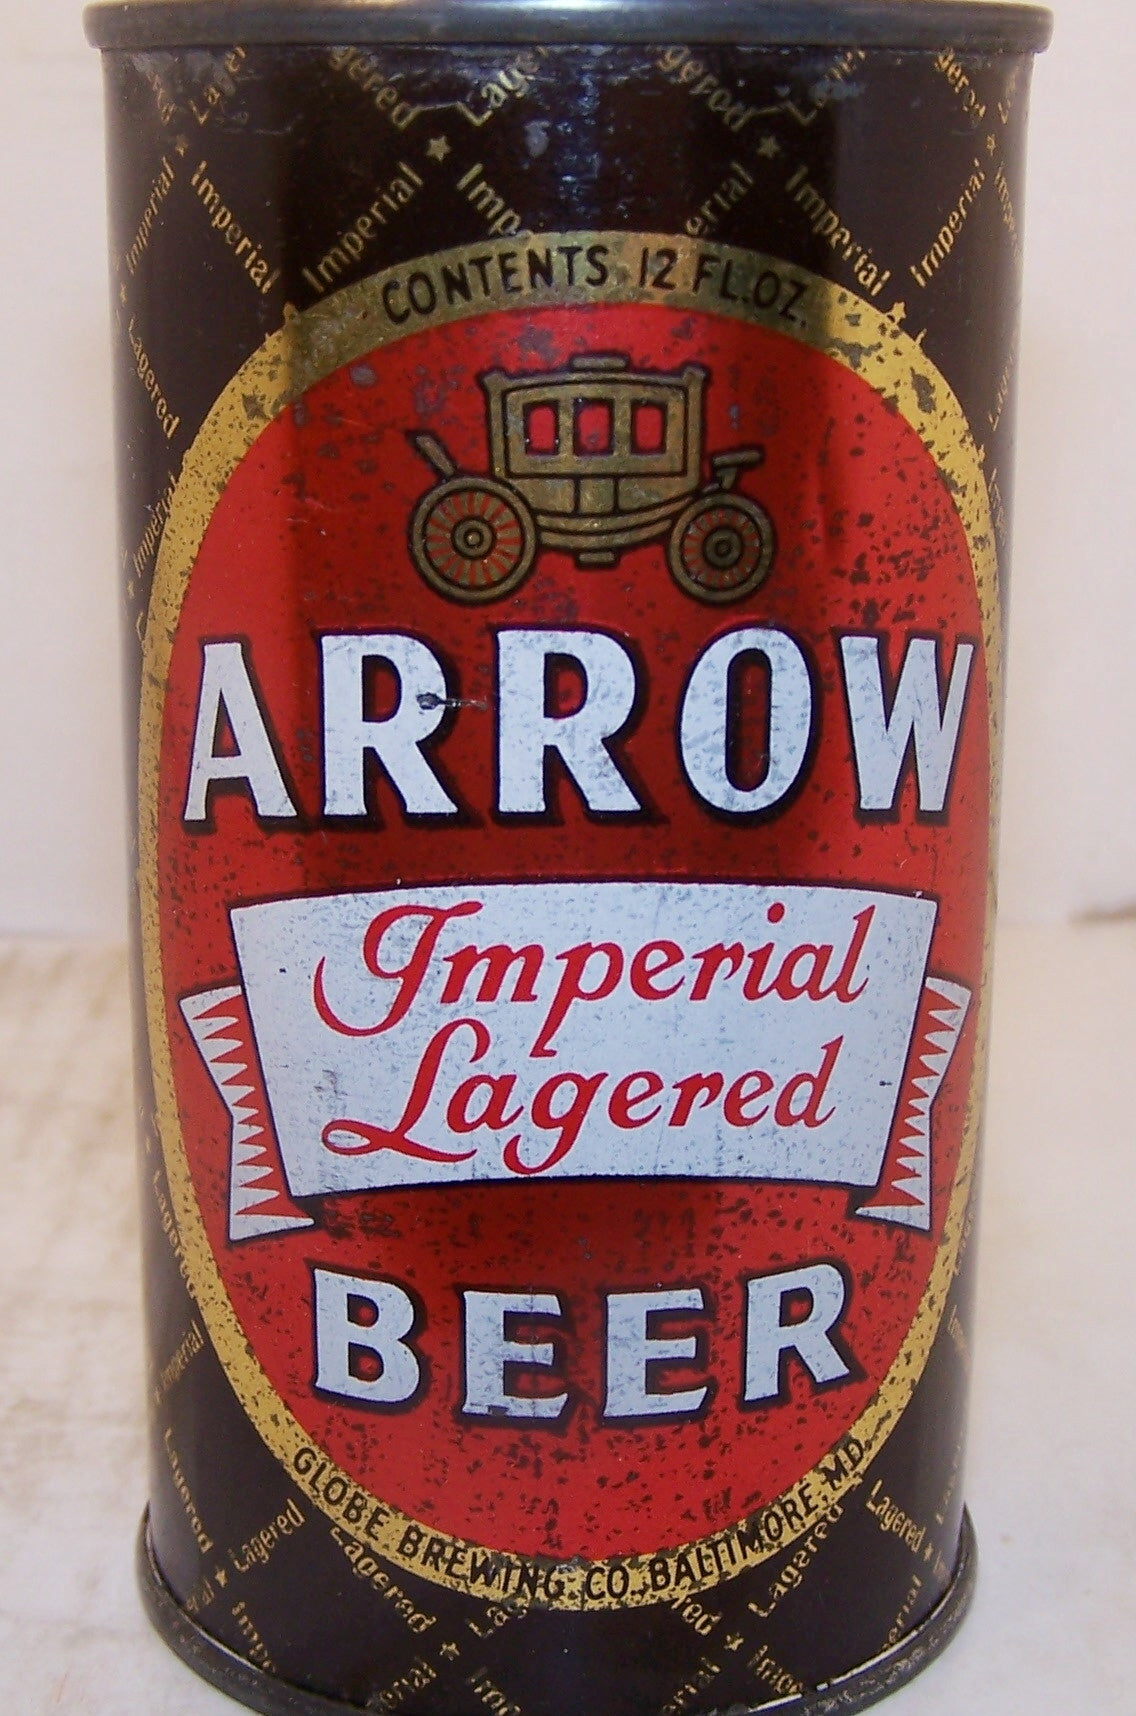 Arrow Imperial Lagered Beer, USBC 32-6 Grade 1- Sold on 2/11/15